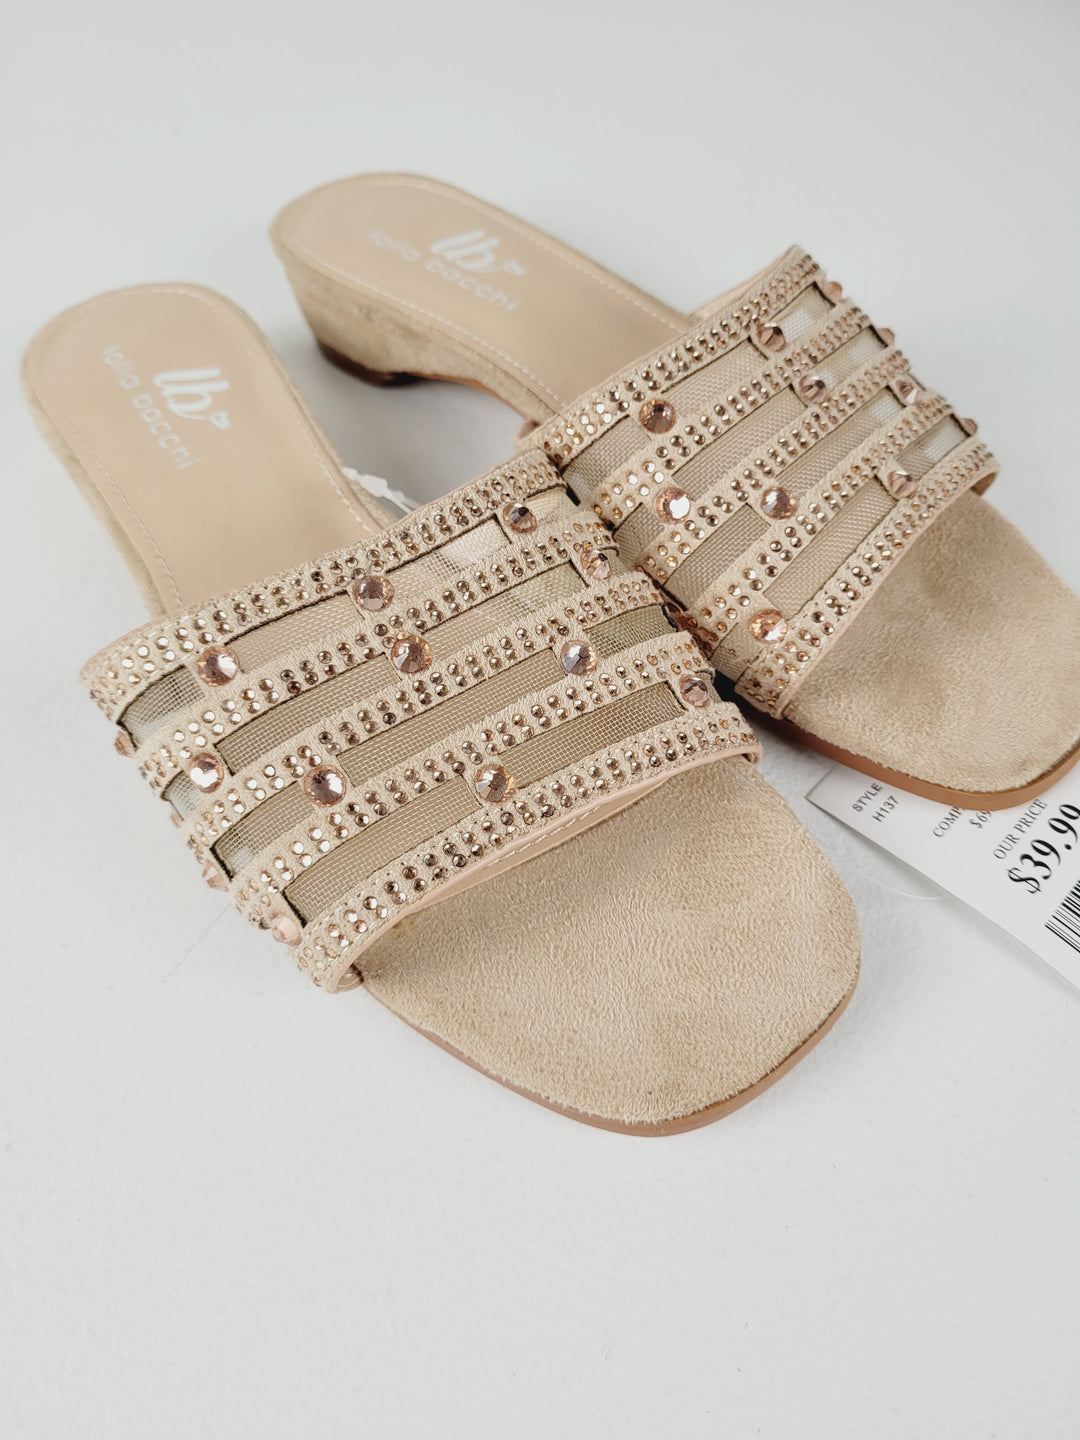 LOLLA BACCHI TAUPE SANDALS LADIES SIZE 5 NEW!